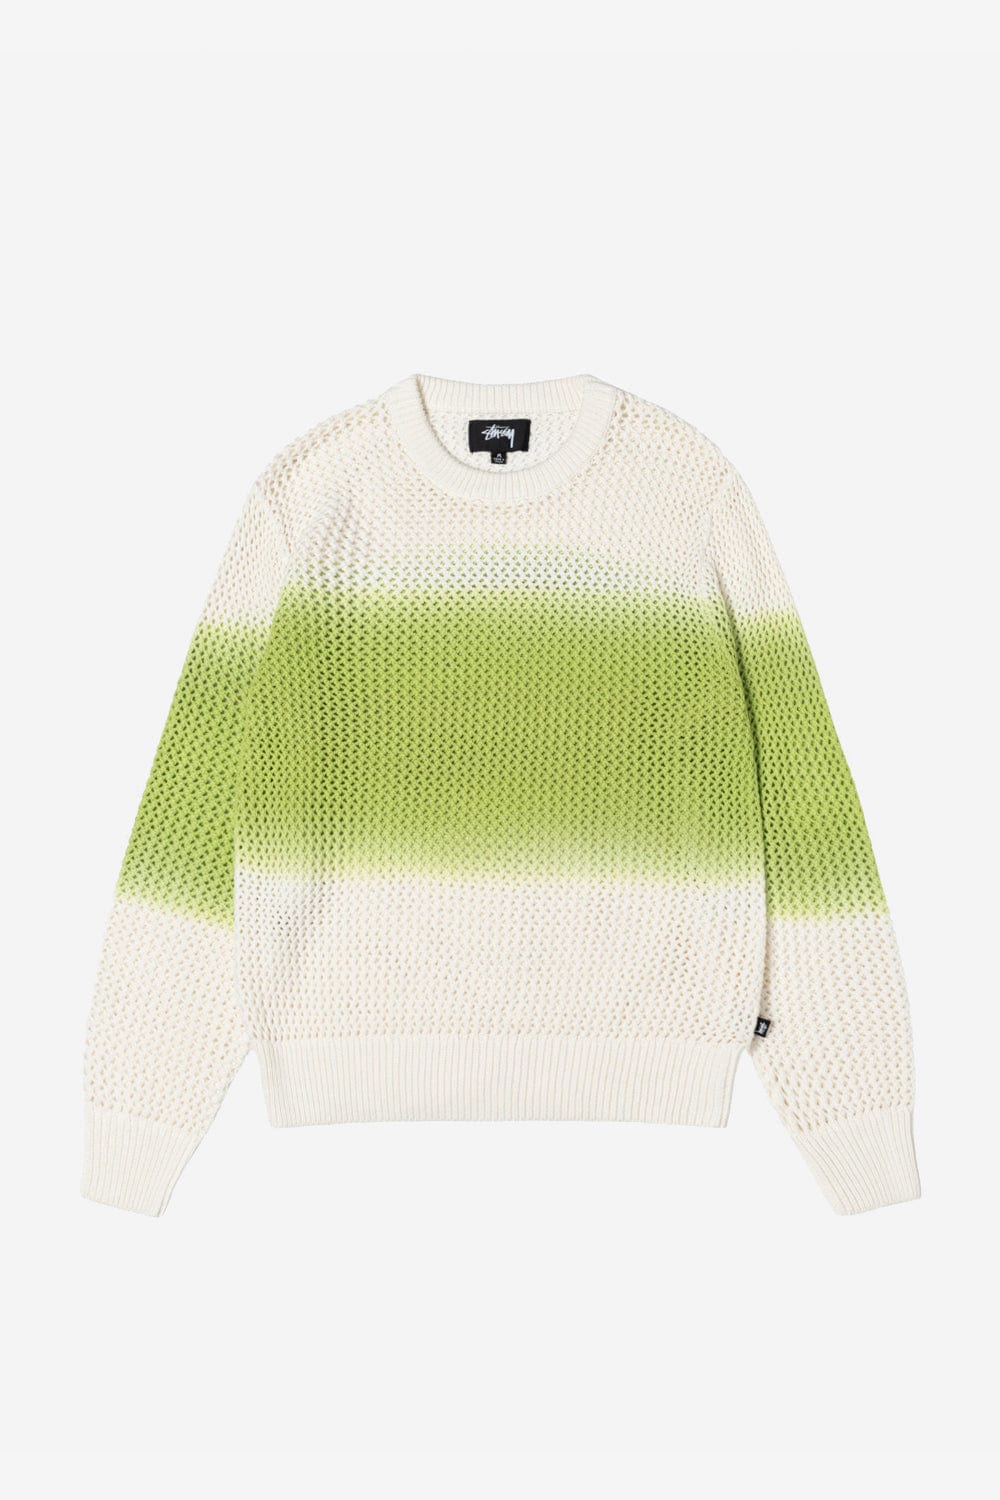 Stussy Pigment Dyed Sweater in Blue for Men